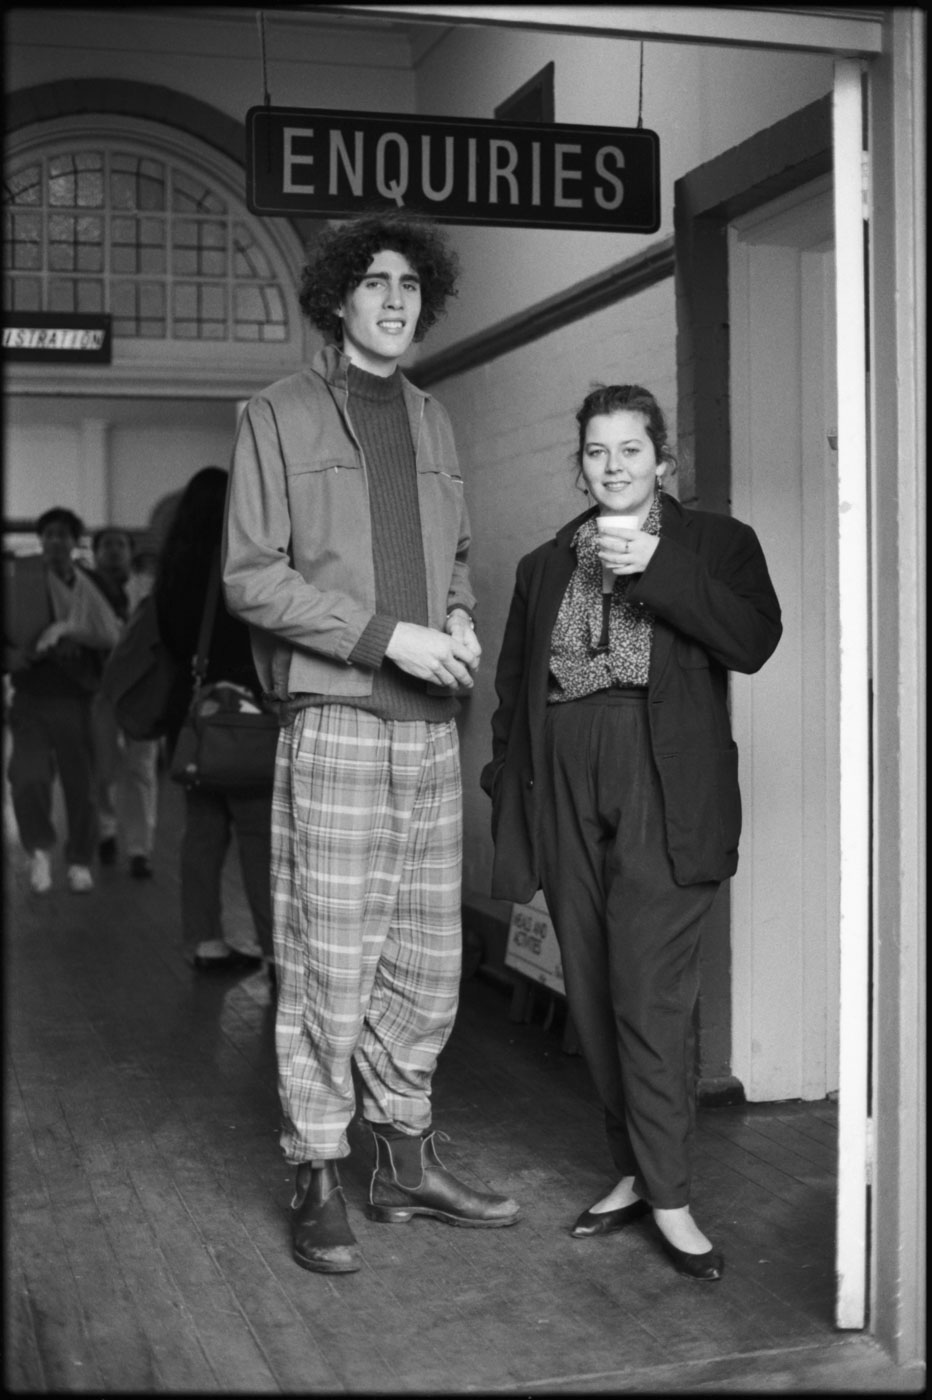 Staff assistants Malaki Coles and Sally Dowling (daughter of stallholder Sue Dowling) | 1992 | R29-08